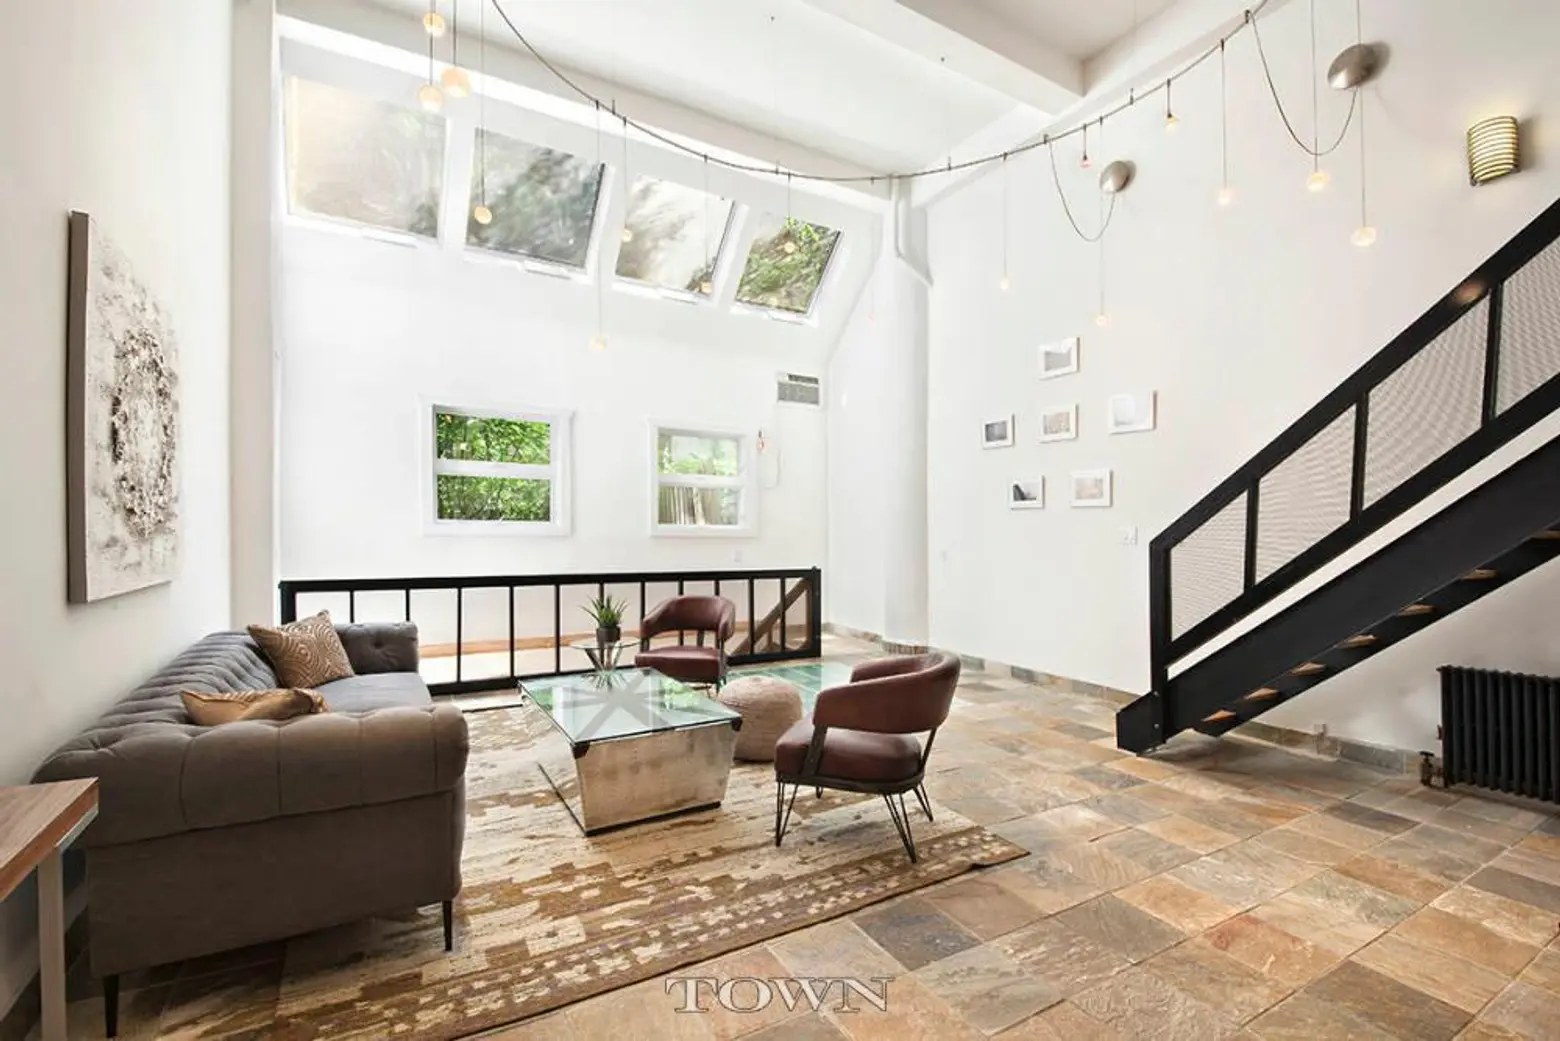 Entertain on Three Levels in This $2.5M Modern Chelsea Loft